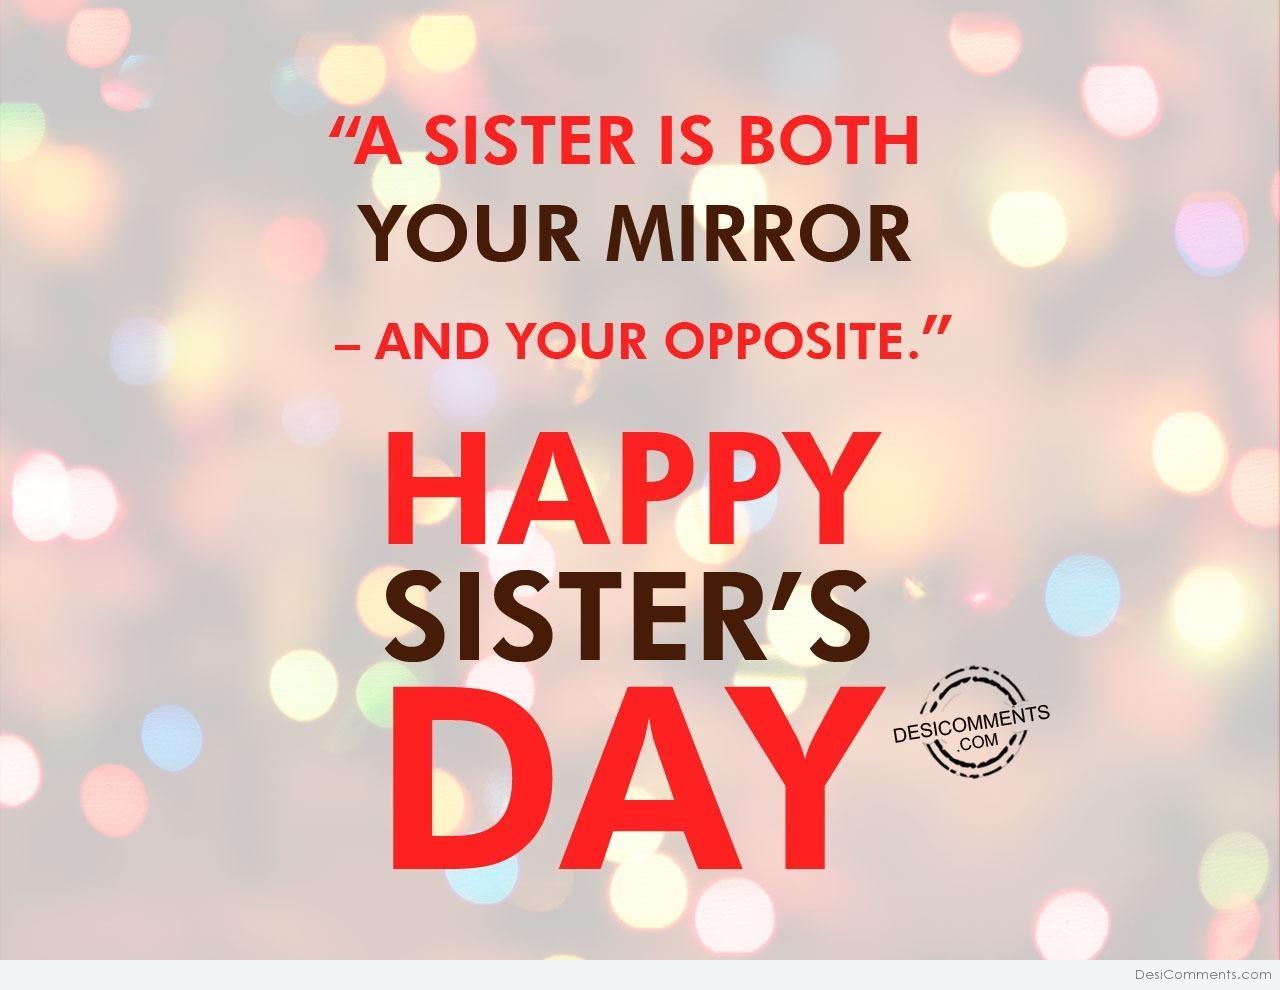 Happy Sister's Day Wallpapers Wallpaper Cave